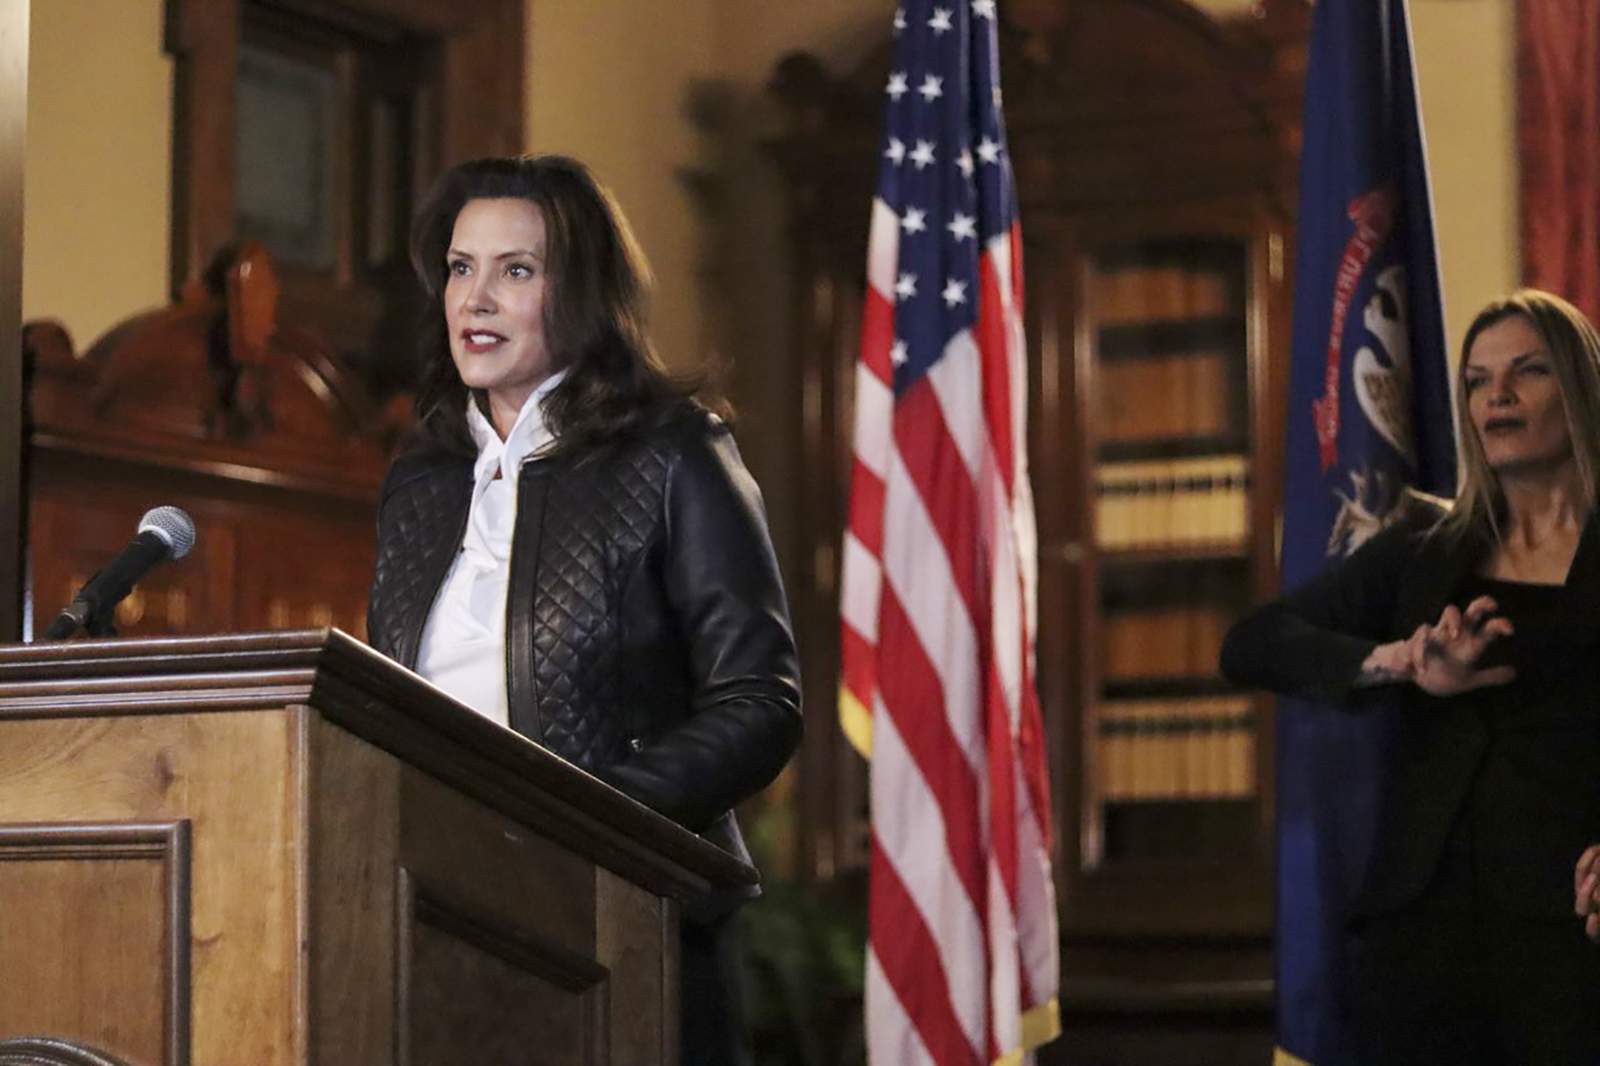 Everything you should know about COVID-19 in Michigan before Gov. Whitmer’s briefing (Dec. 29)